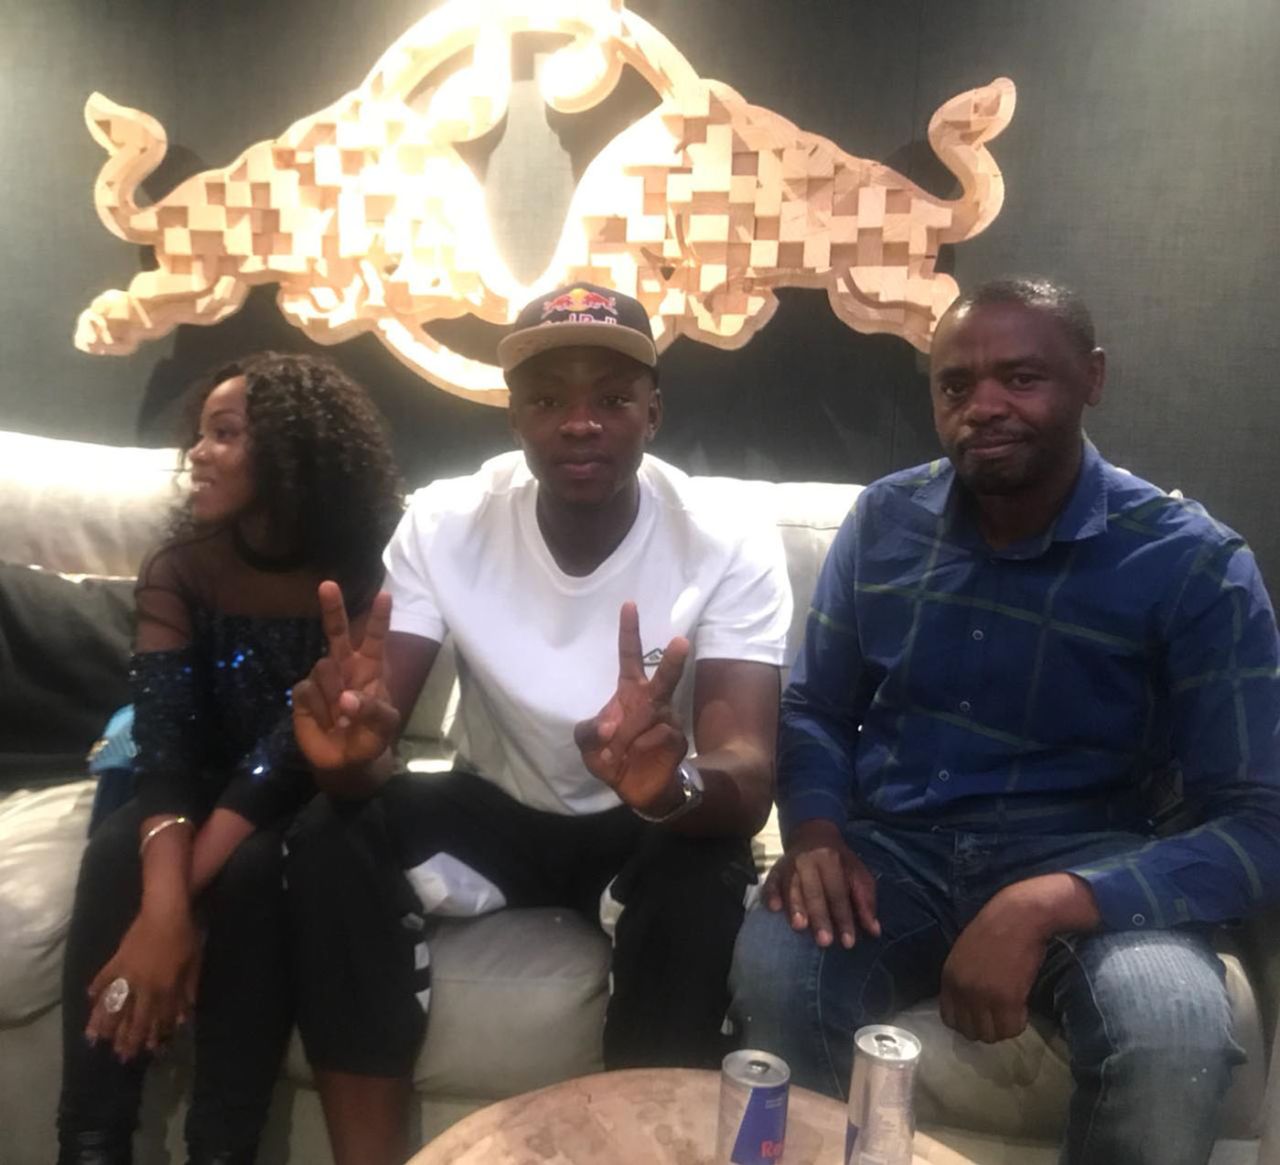 Singer Motswedi Modiba, Kagiso Rabada and his father, Dr Mpho Rabada, at the launch of a new music track by Modiba and Rabada Snr, Red Bull Studios, Cape Town, February 24, 2020